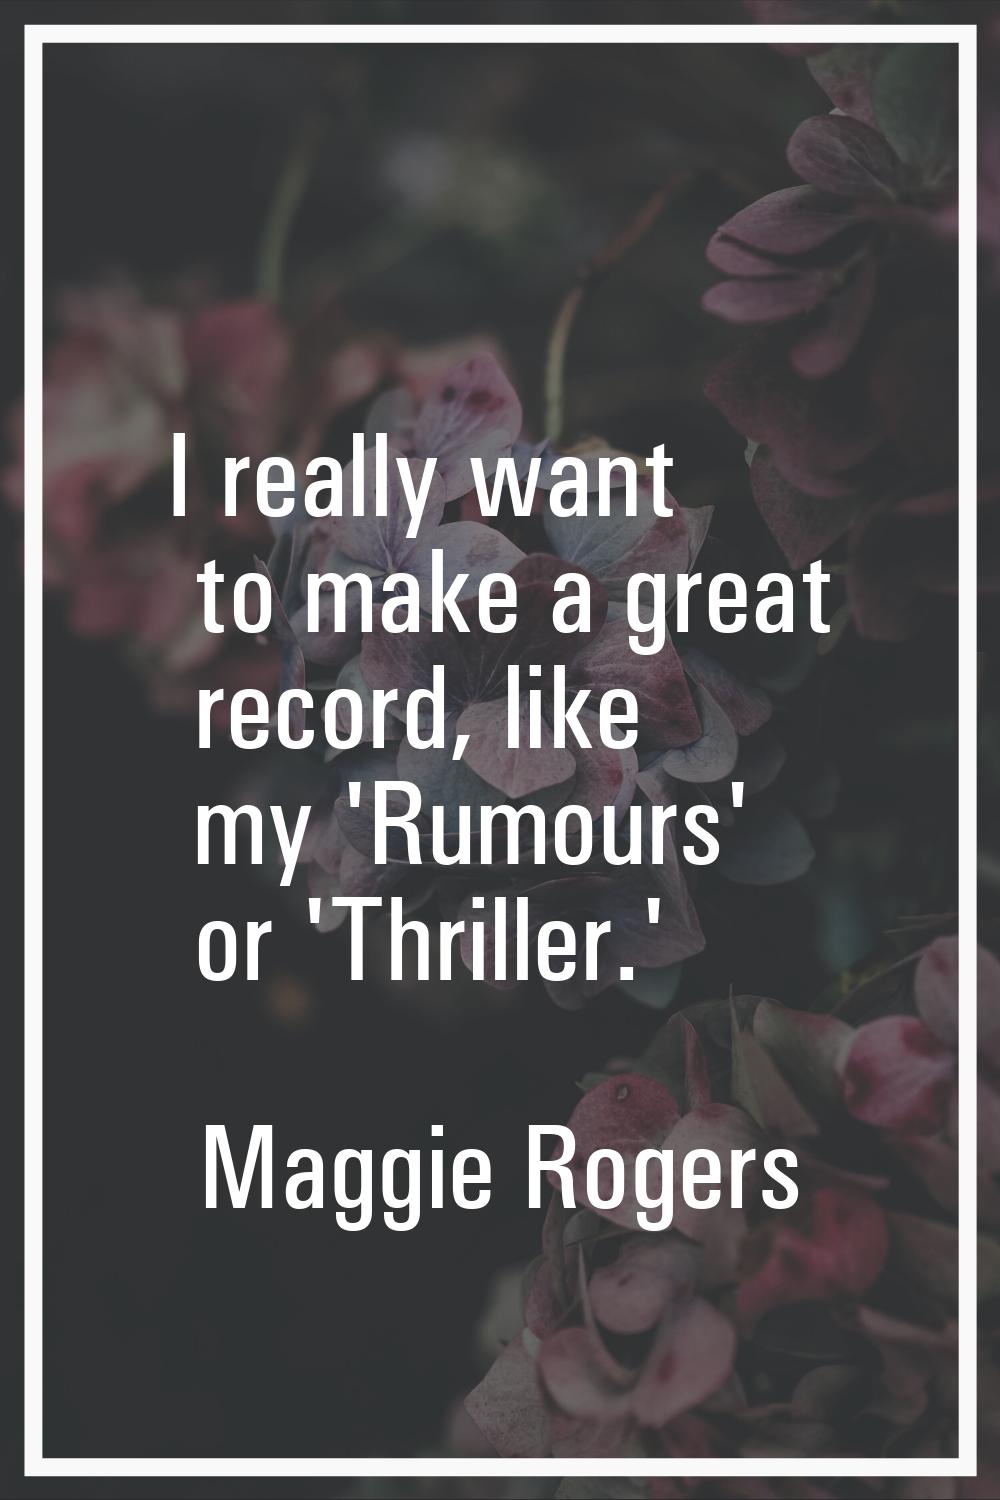 I really want to make a great record, like my 'Rumours' or 'Thriller.'